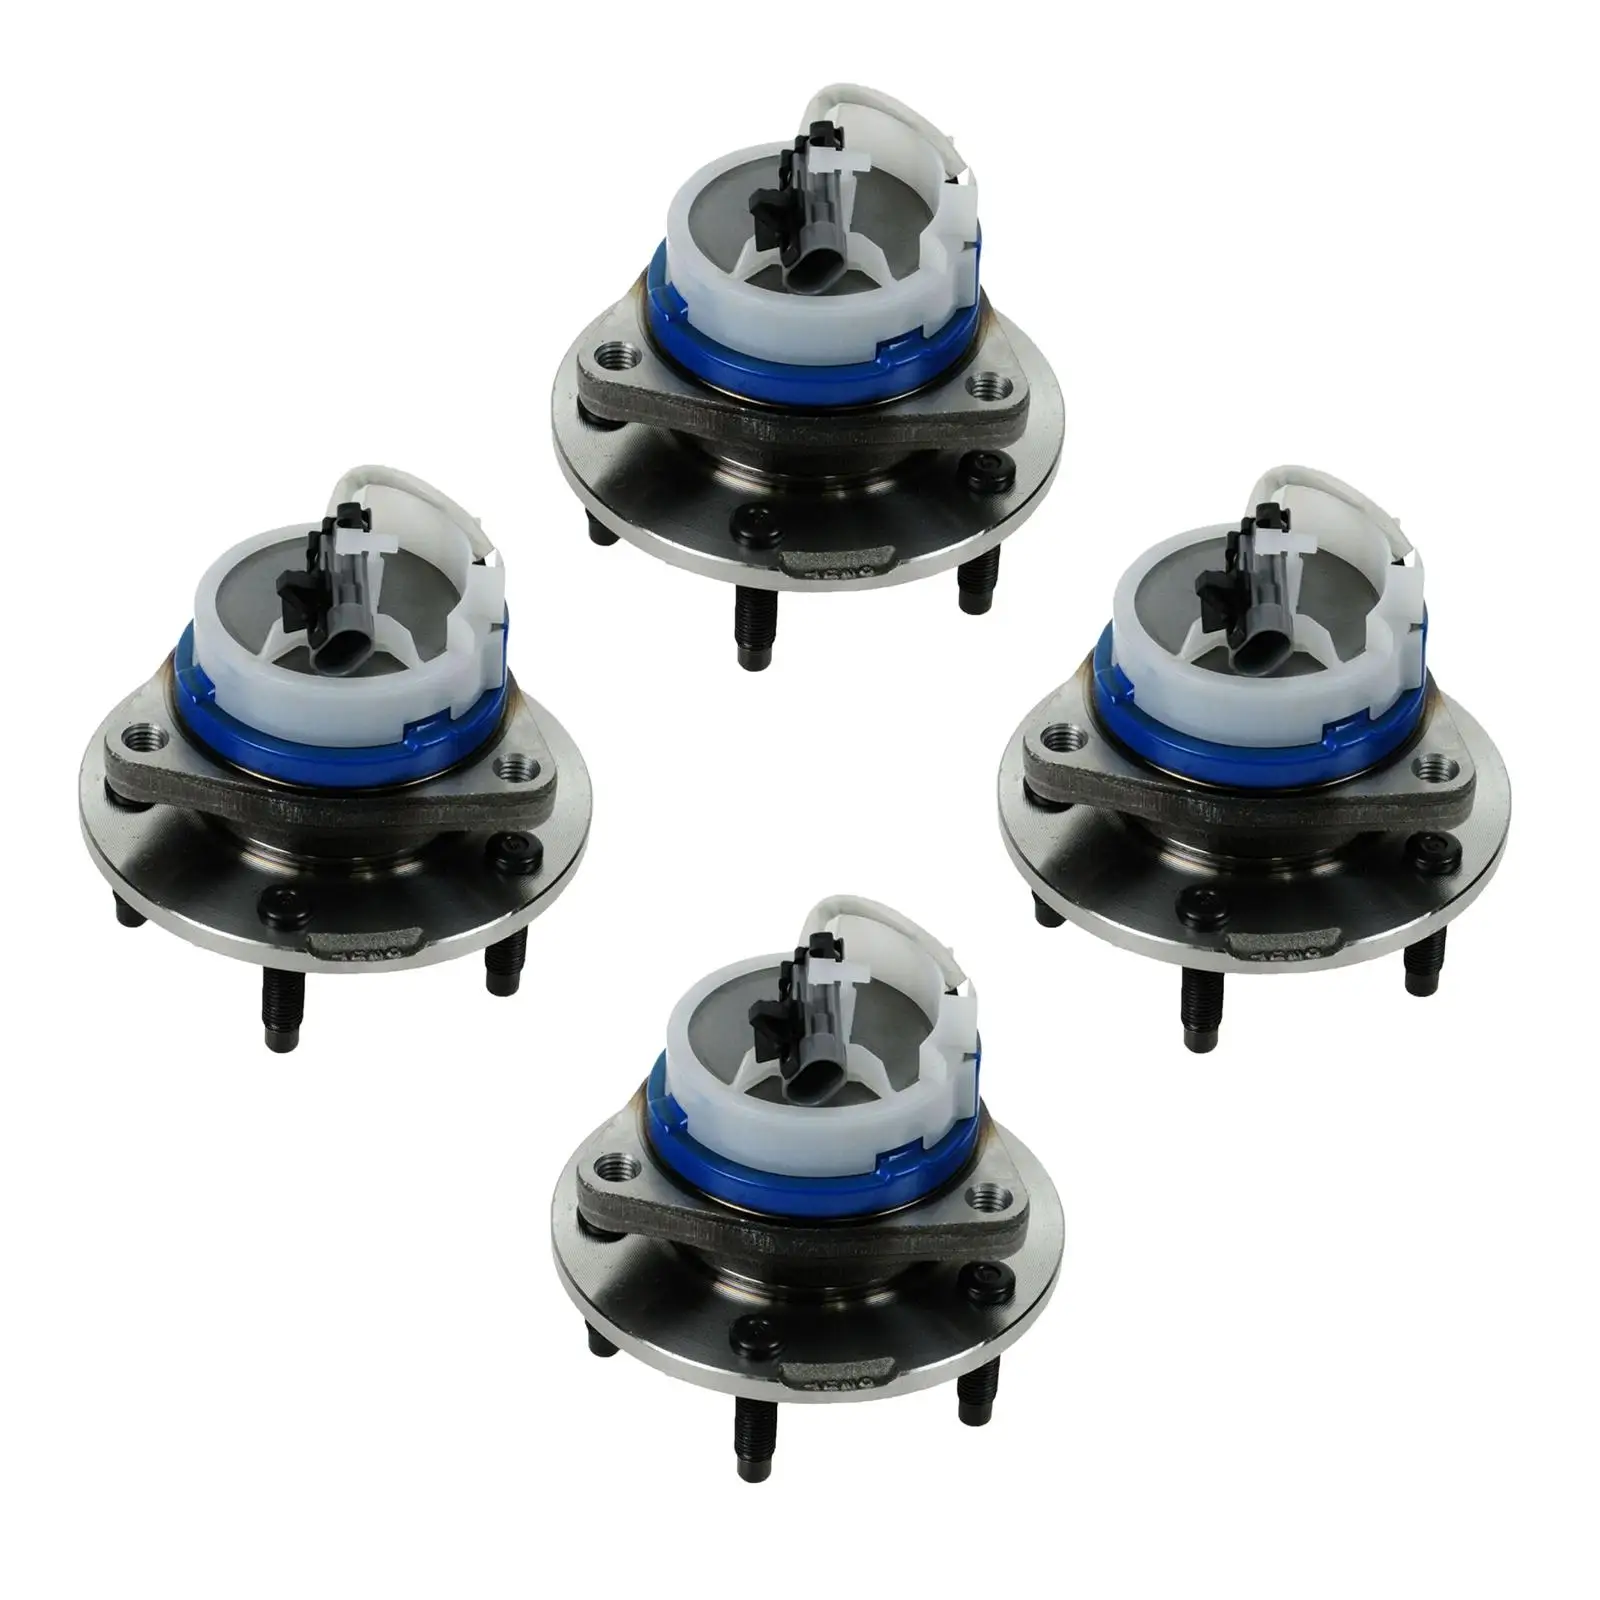 4Pieces 25693148 Spare Parts Replaces Premium Wheel Hub & Bearing 5 Lug Set for